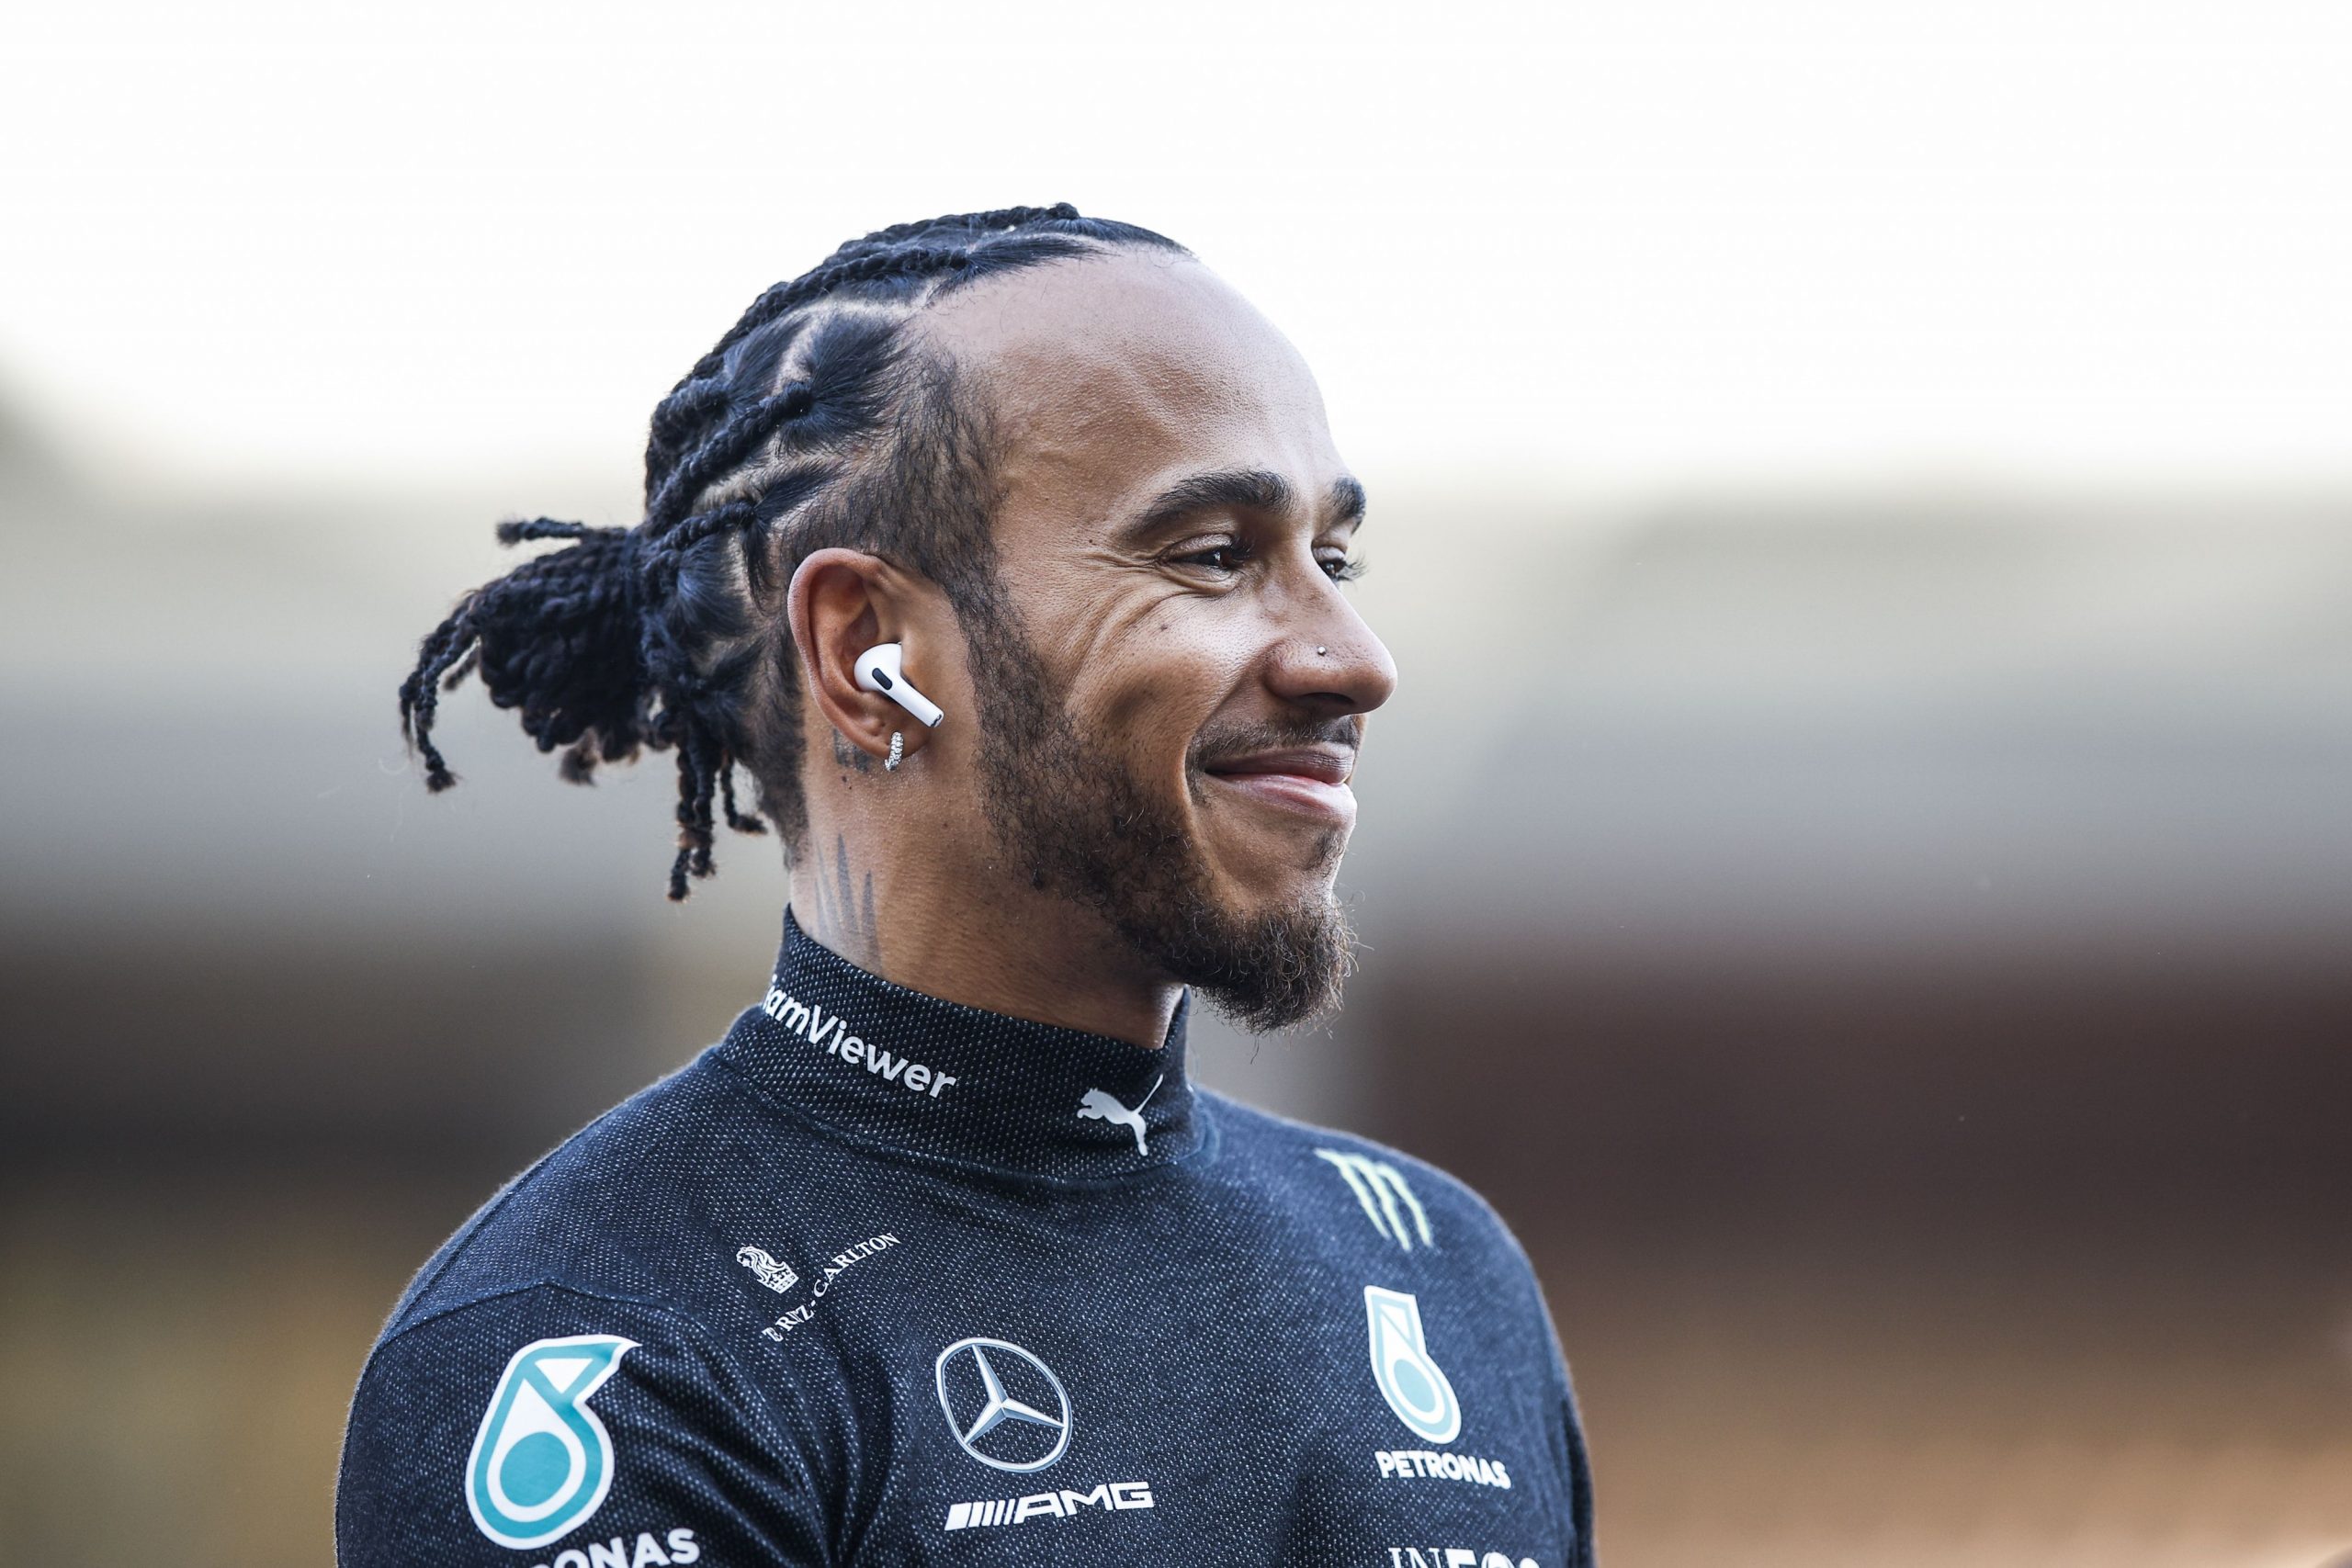 Five facts about Lewis Hamilton that you probably didn’t know